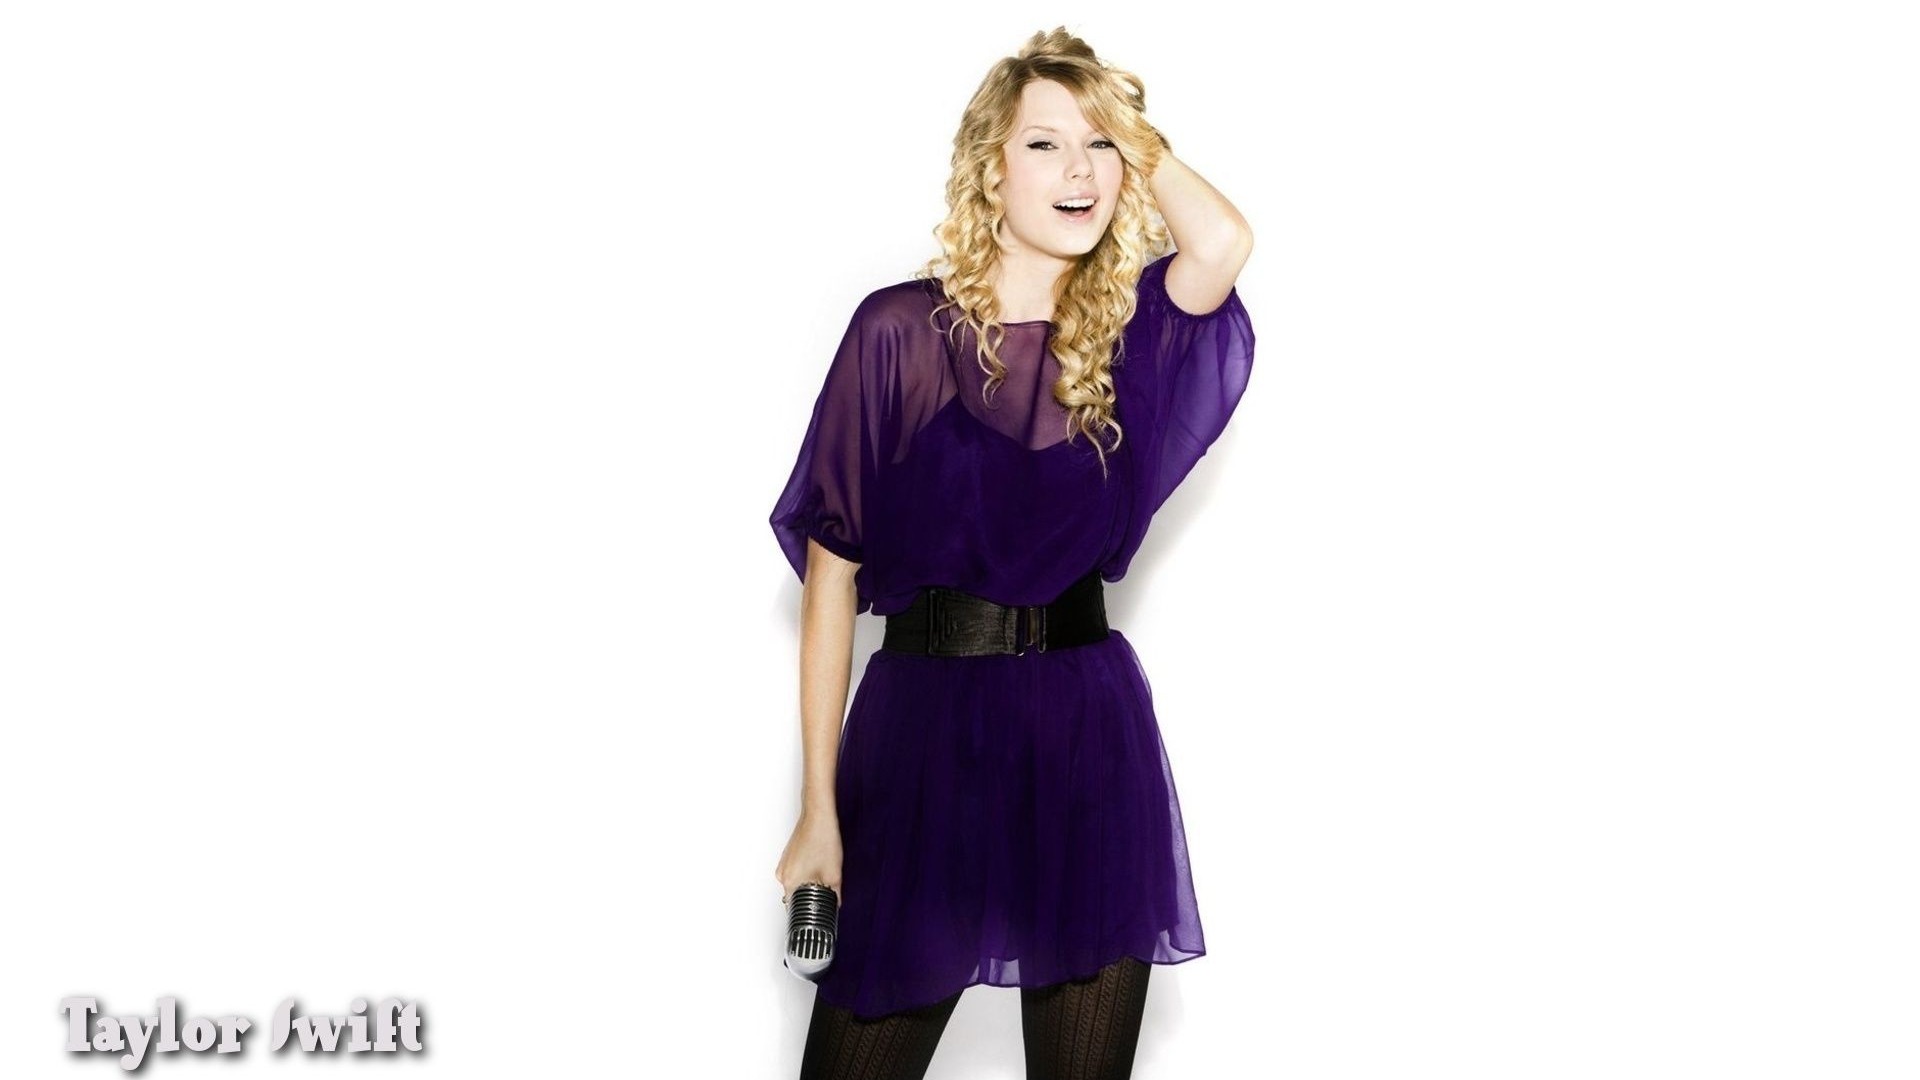 Taylor Swift #083 - 1920x1080 Wallpapers Pictures Photos Images